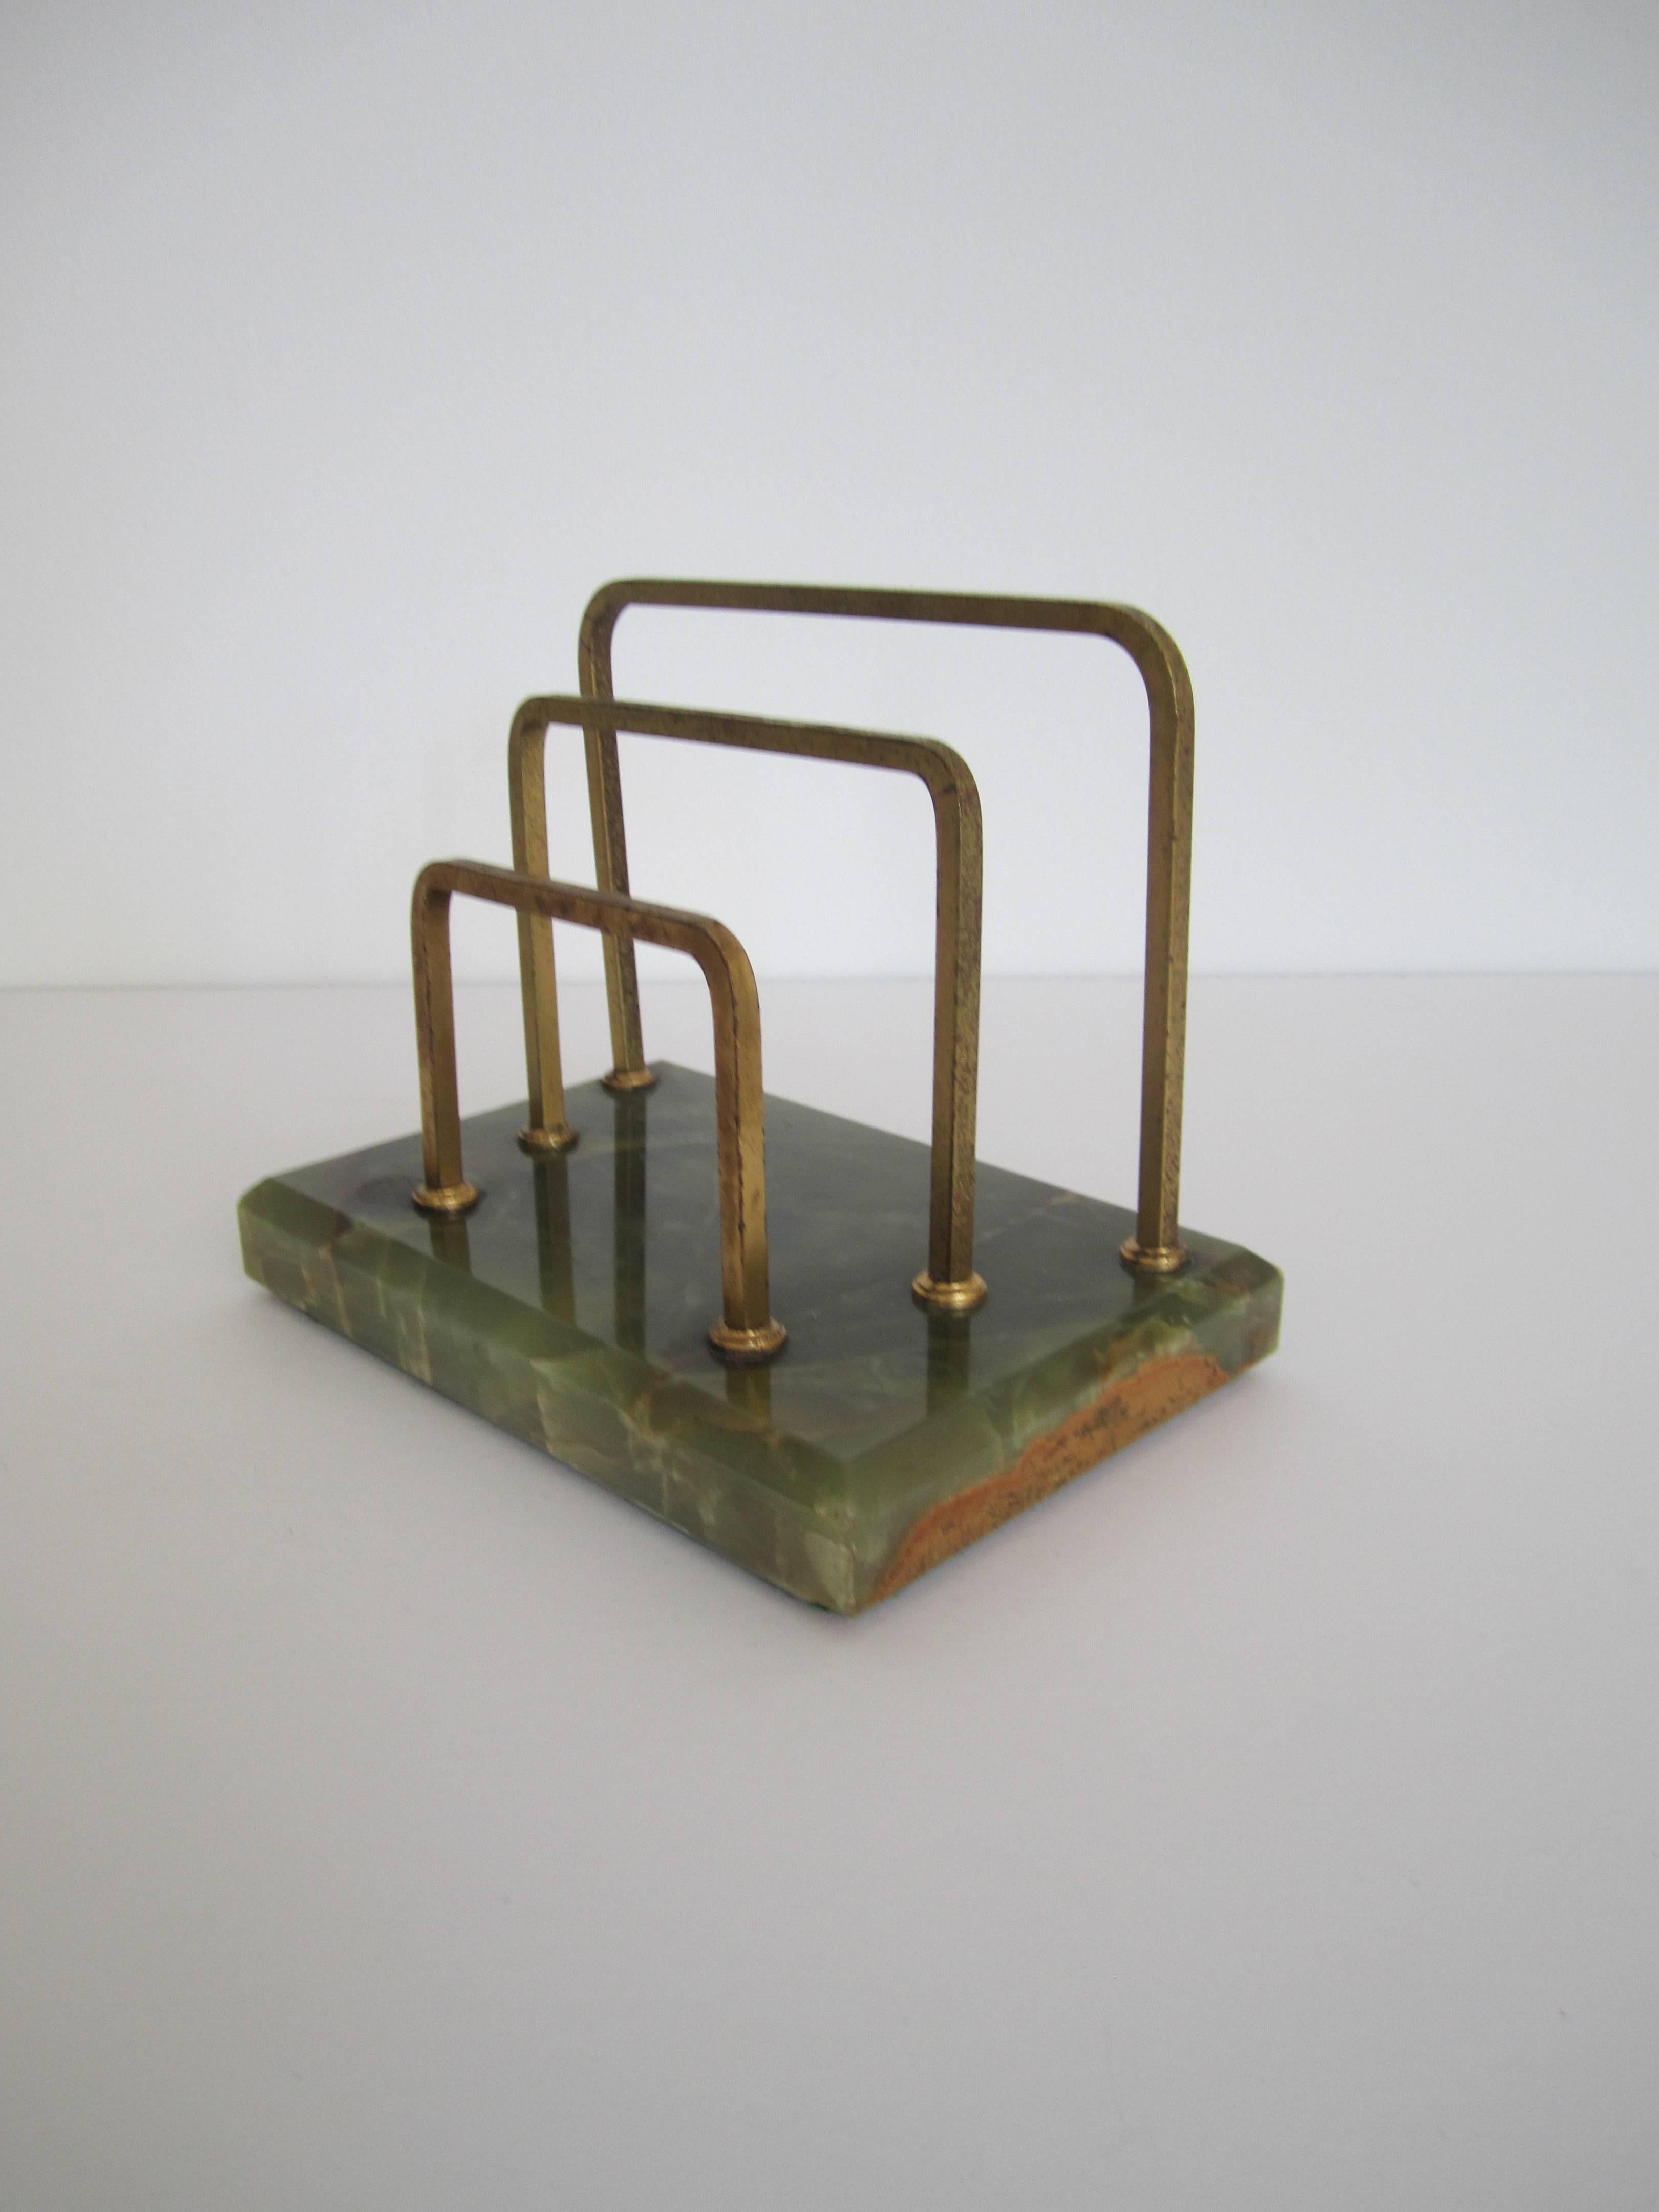 Vintage Brass and Green Onyx Mail or Letter Desk Organizer 2